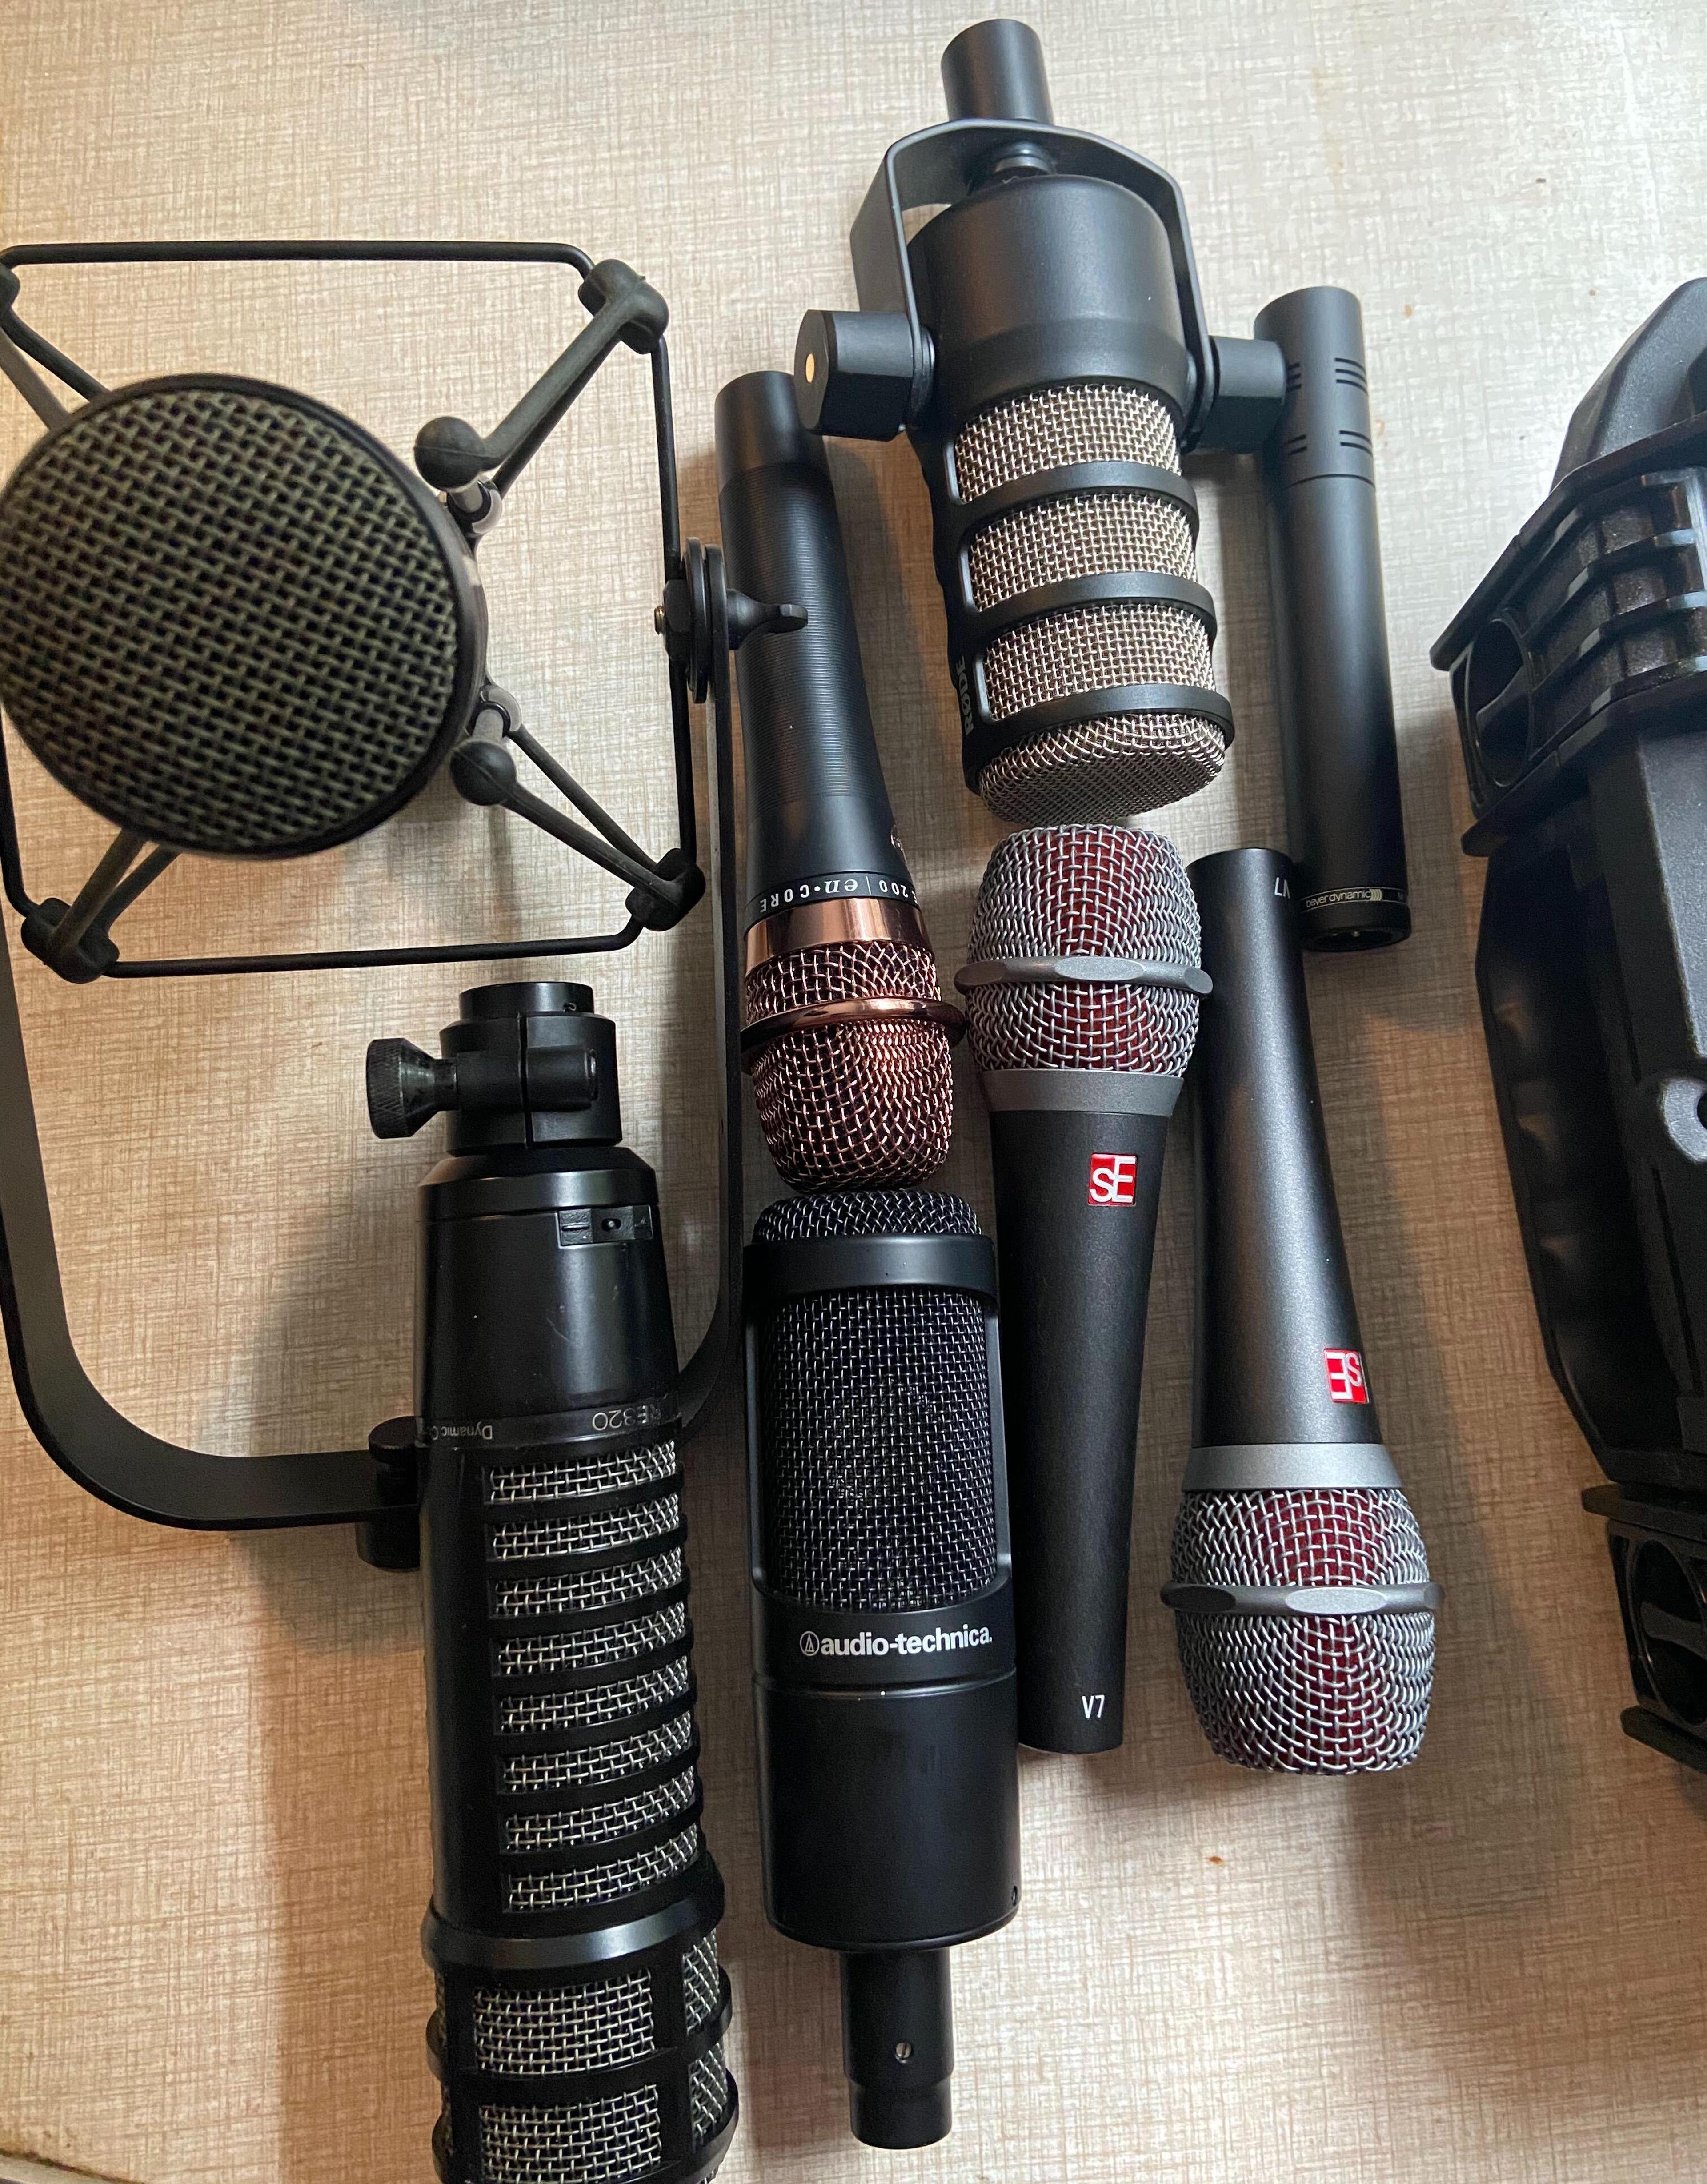 A collection of seven microphones I just had lying on my desk at home.